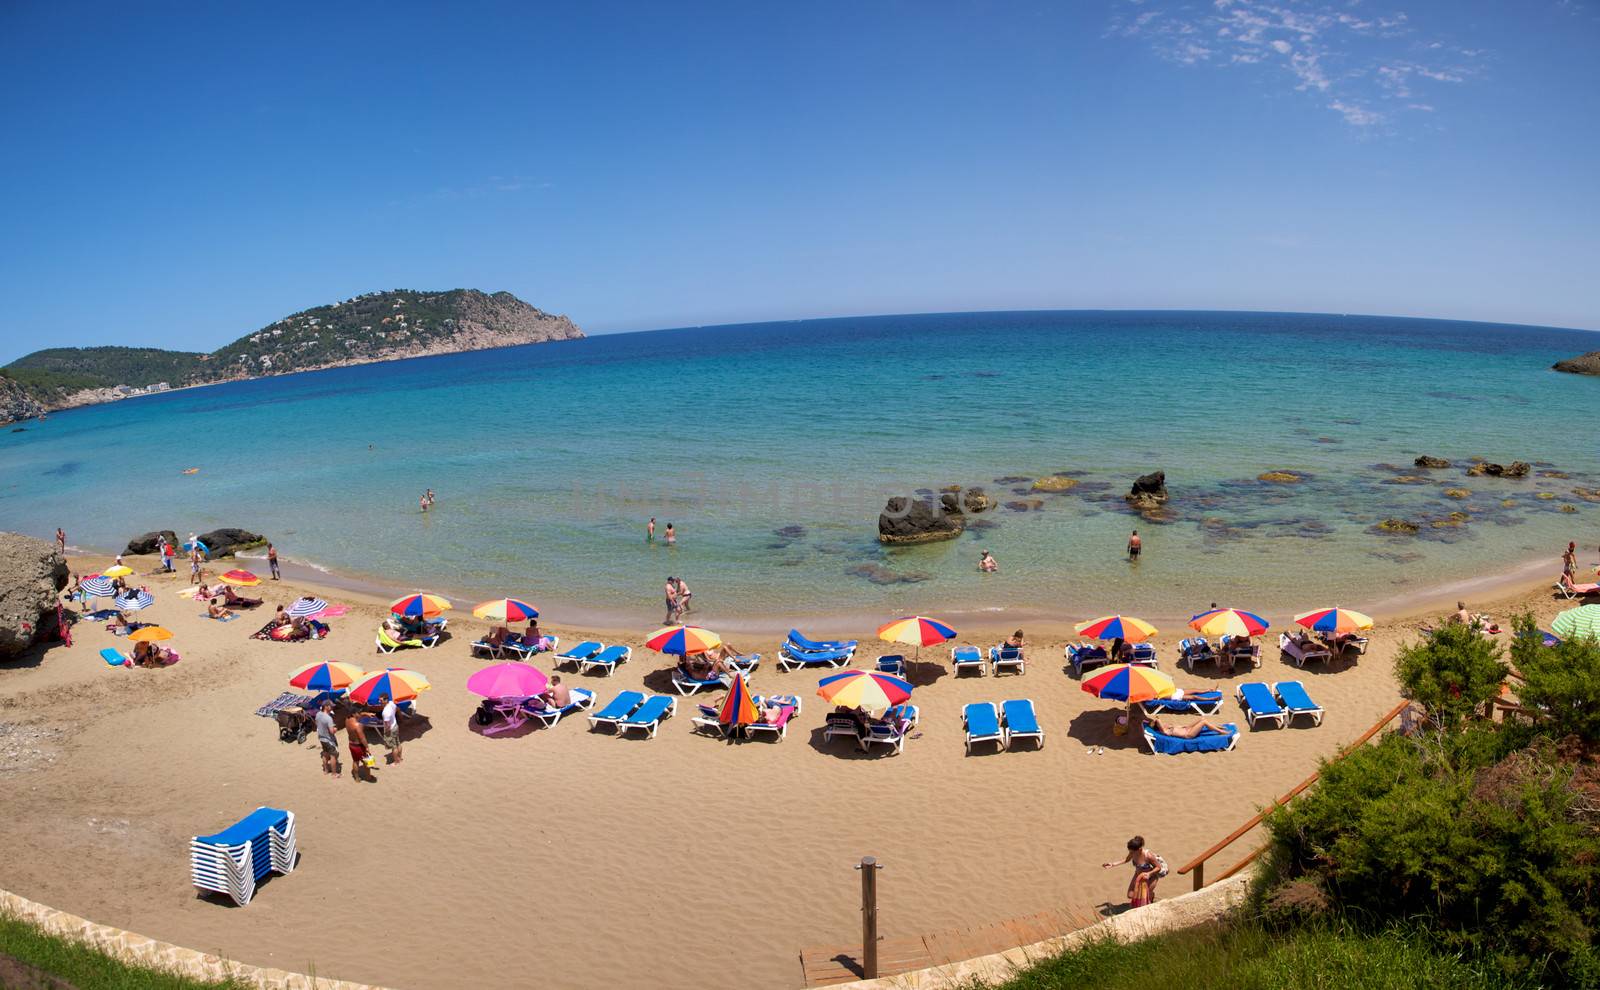 Panoramic view of the beach in Ibiza with clear sky